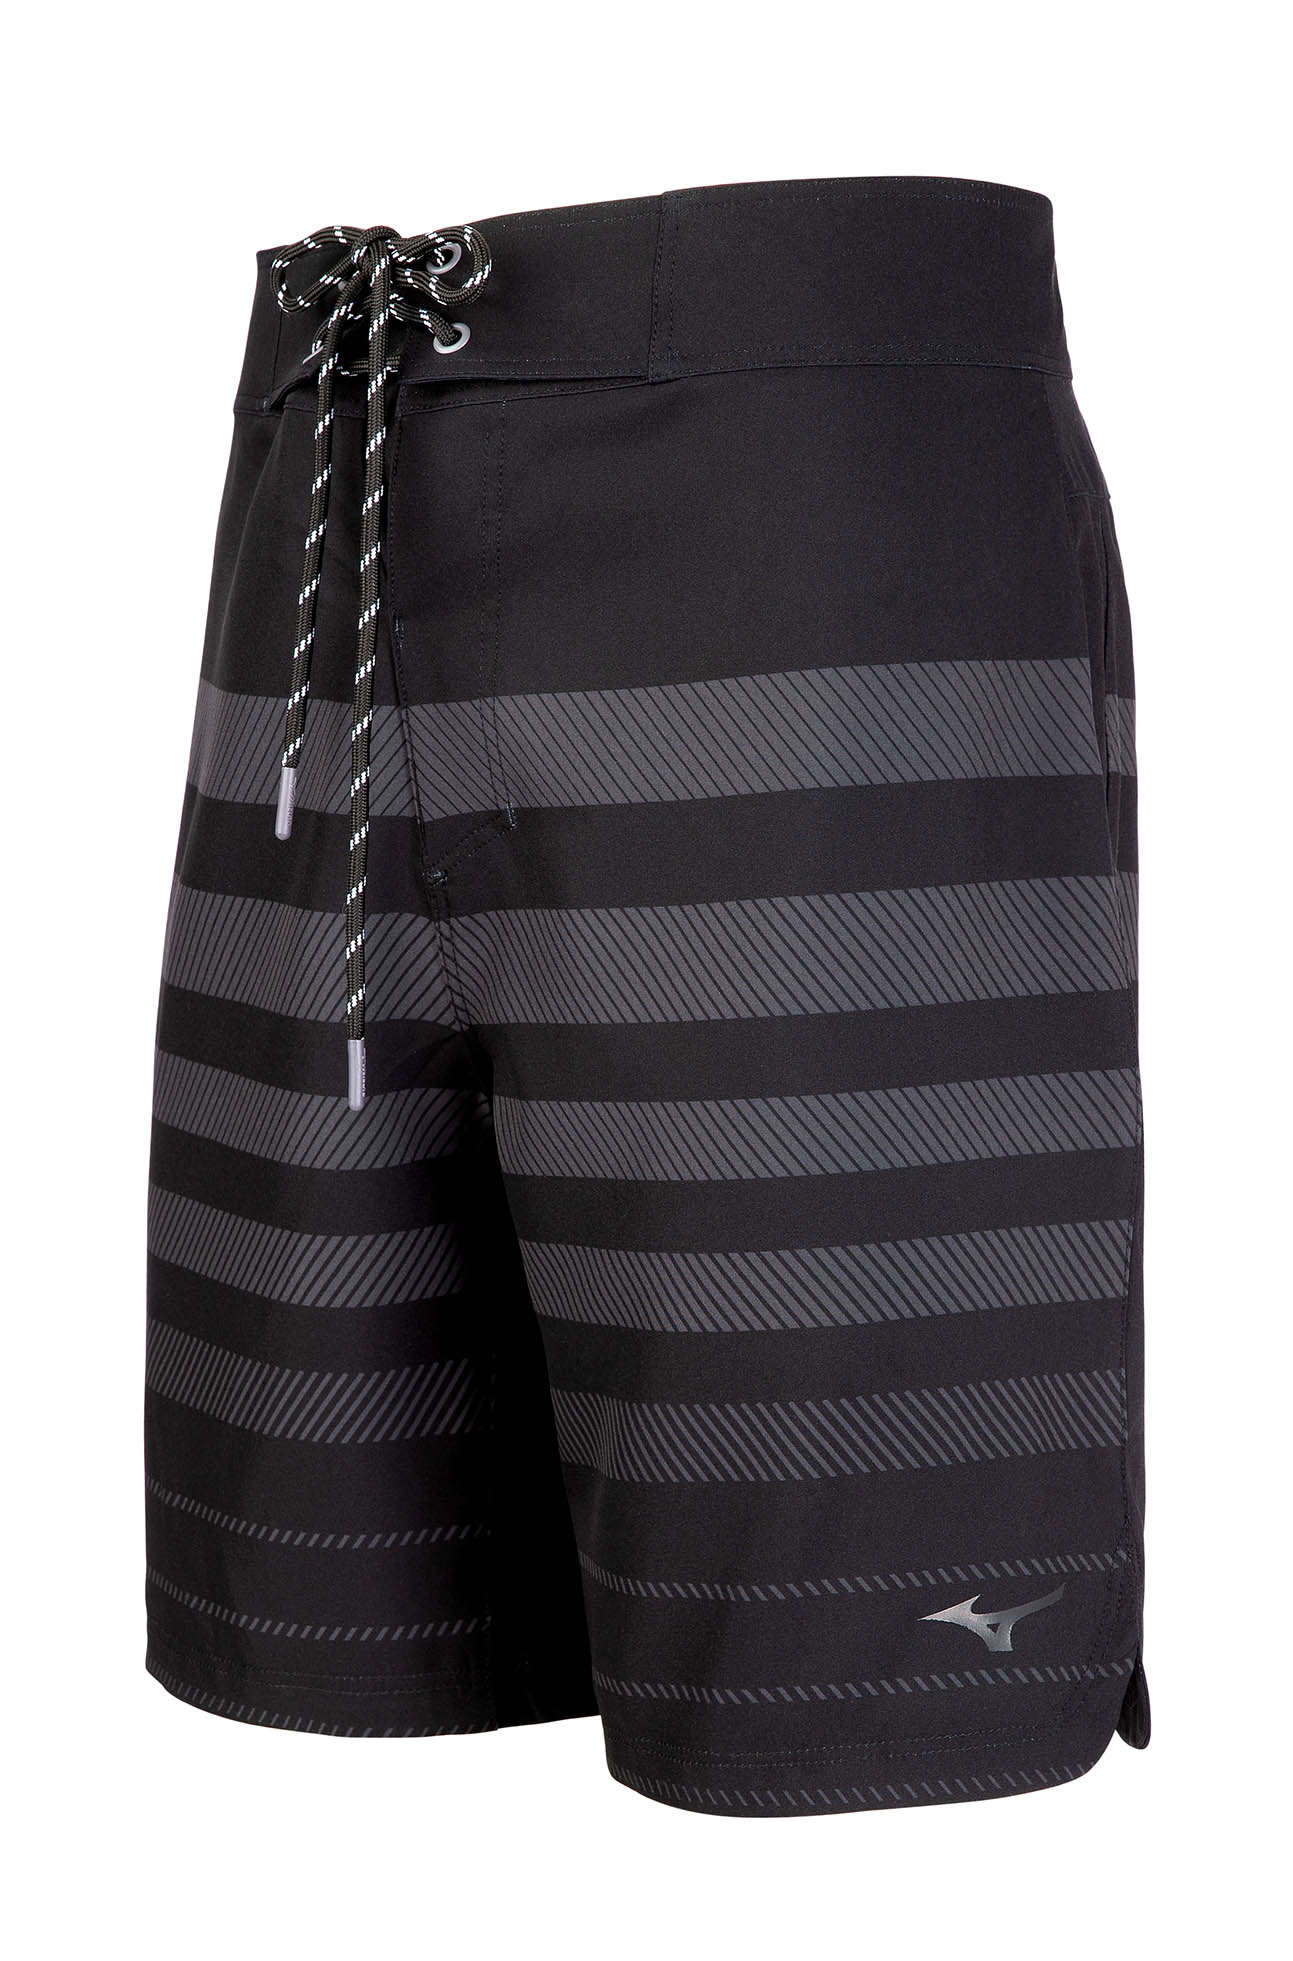 Ghost mannequin of black and grey Mizuno Men's Volleyball Shorts